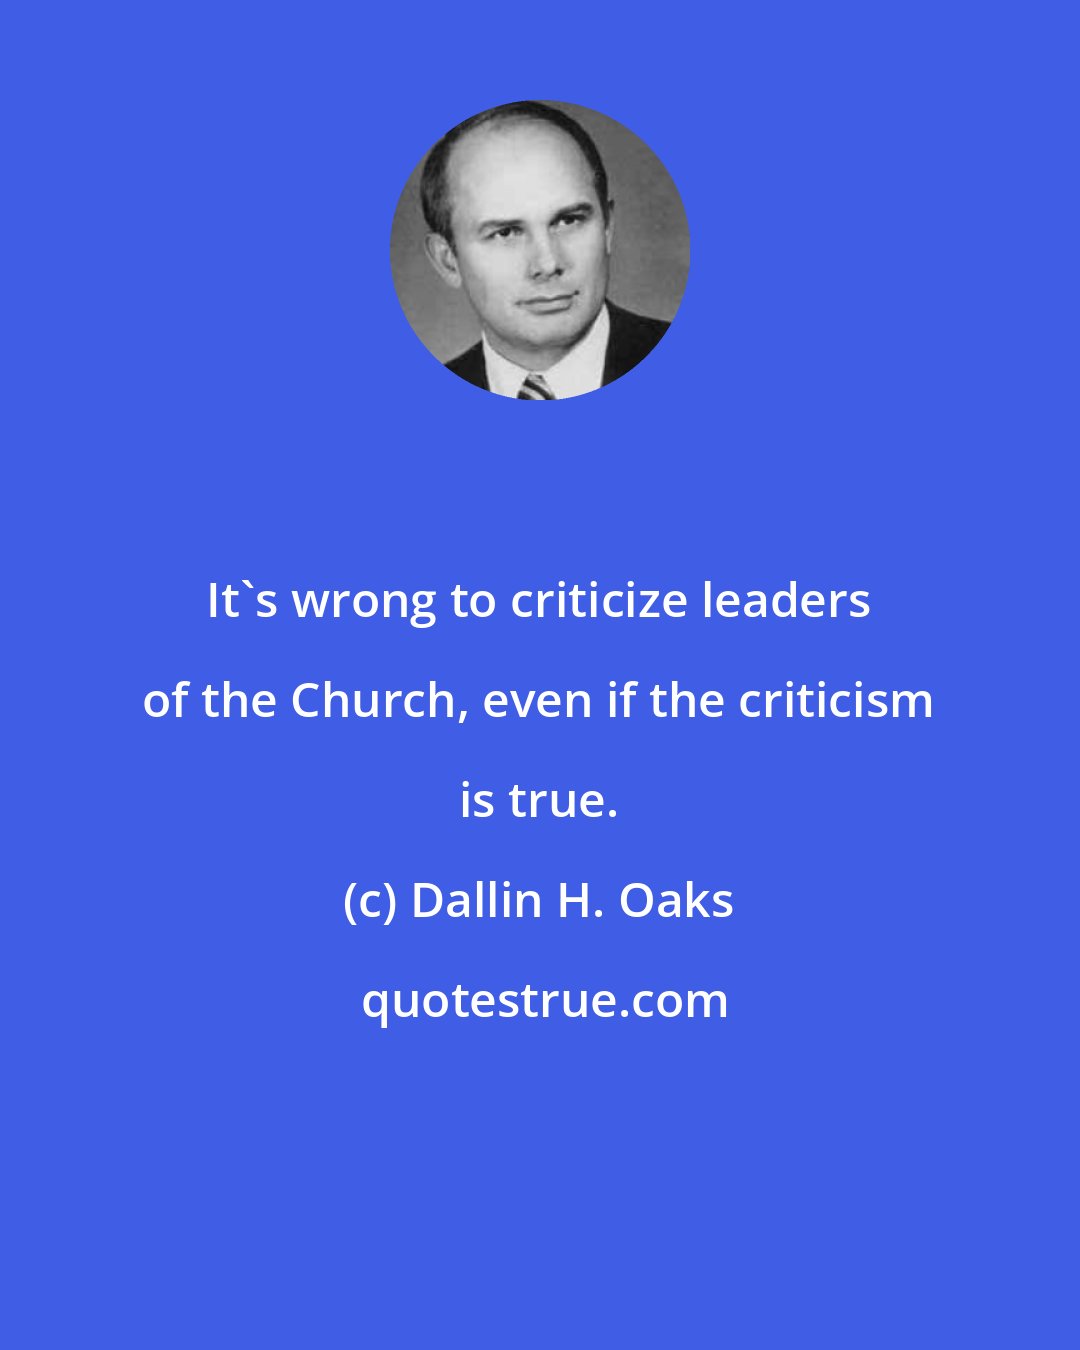 Dallin H. Oaks: It's wrong to criticize leaders of the Church, even if the criticism is true.